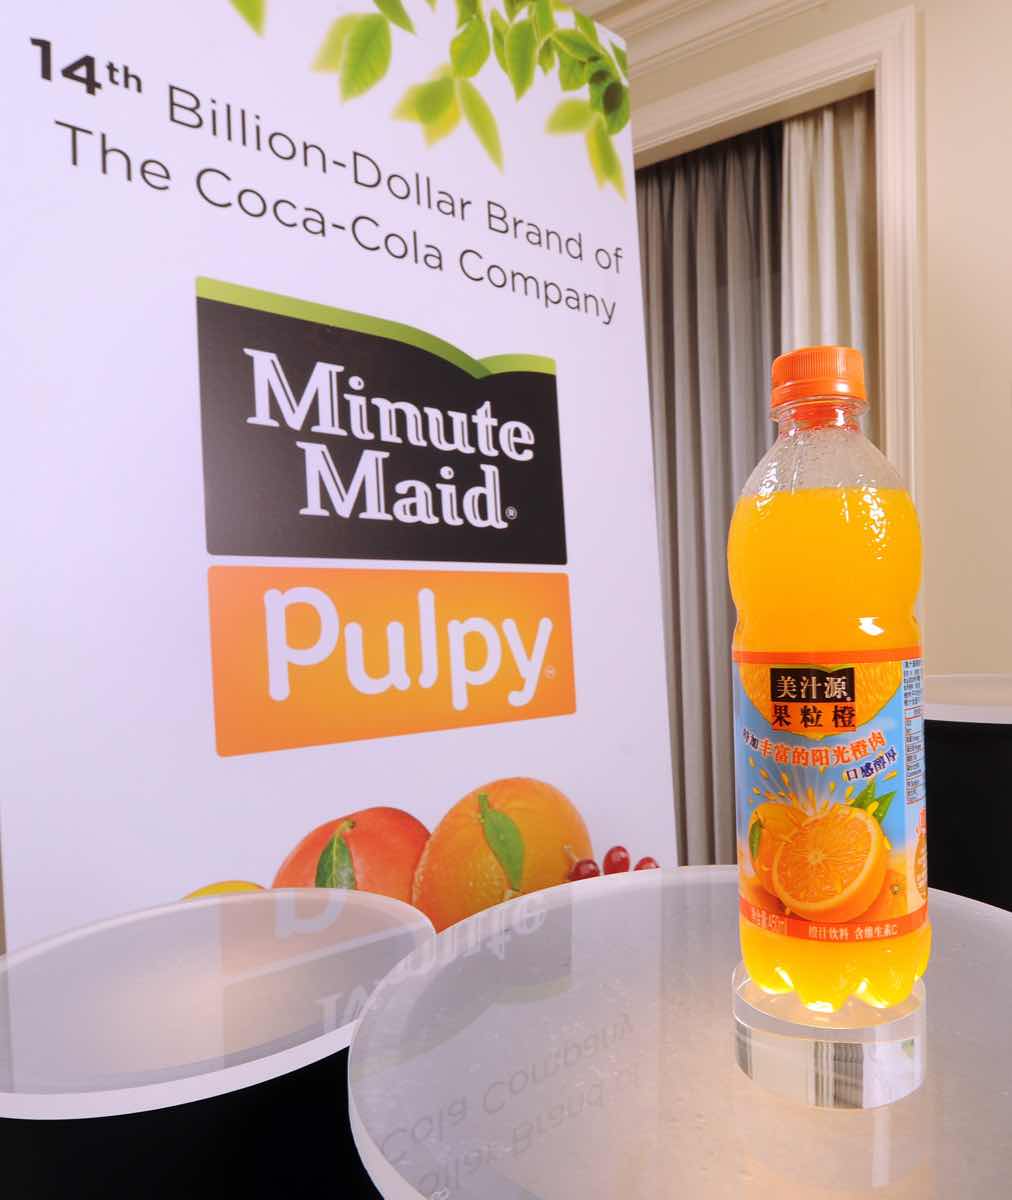 Minute Maid Pulpy becomes Coca-Cola’s 14th $1bn brand